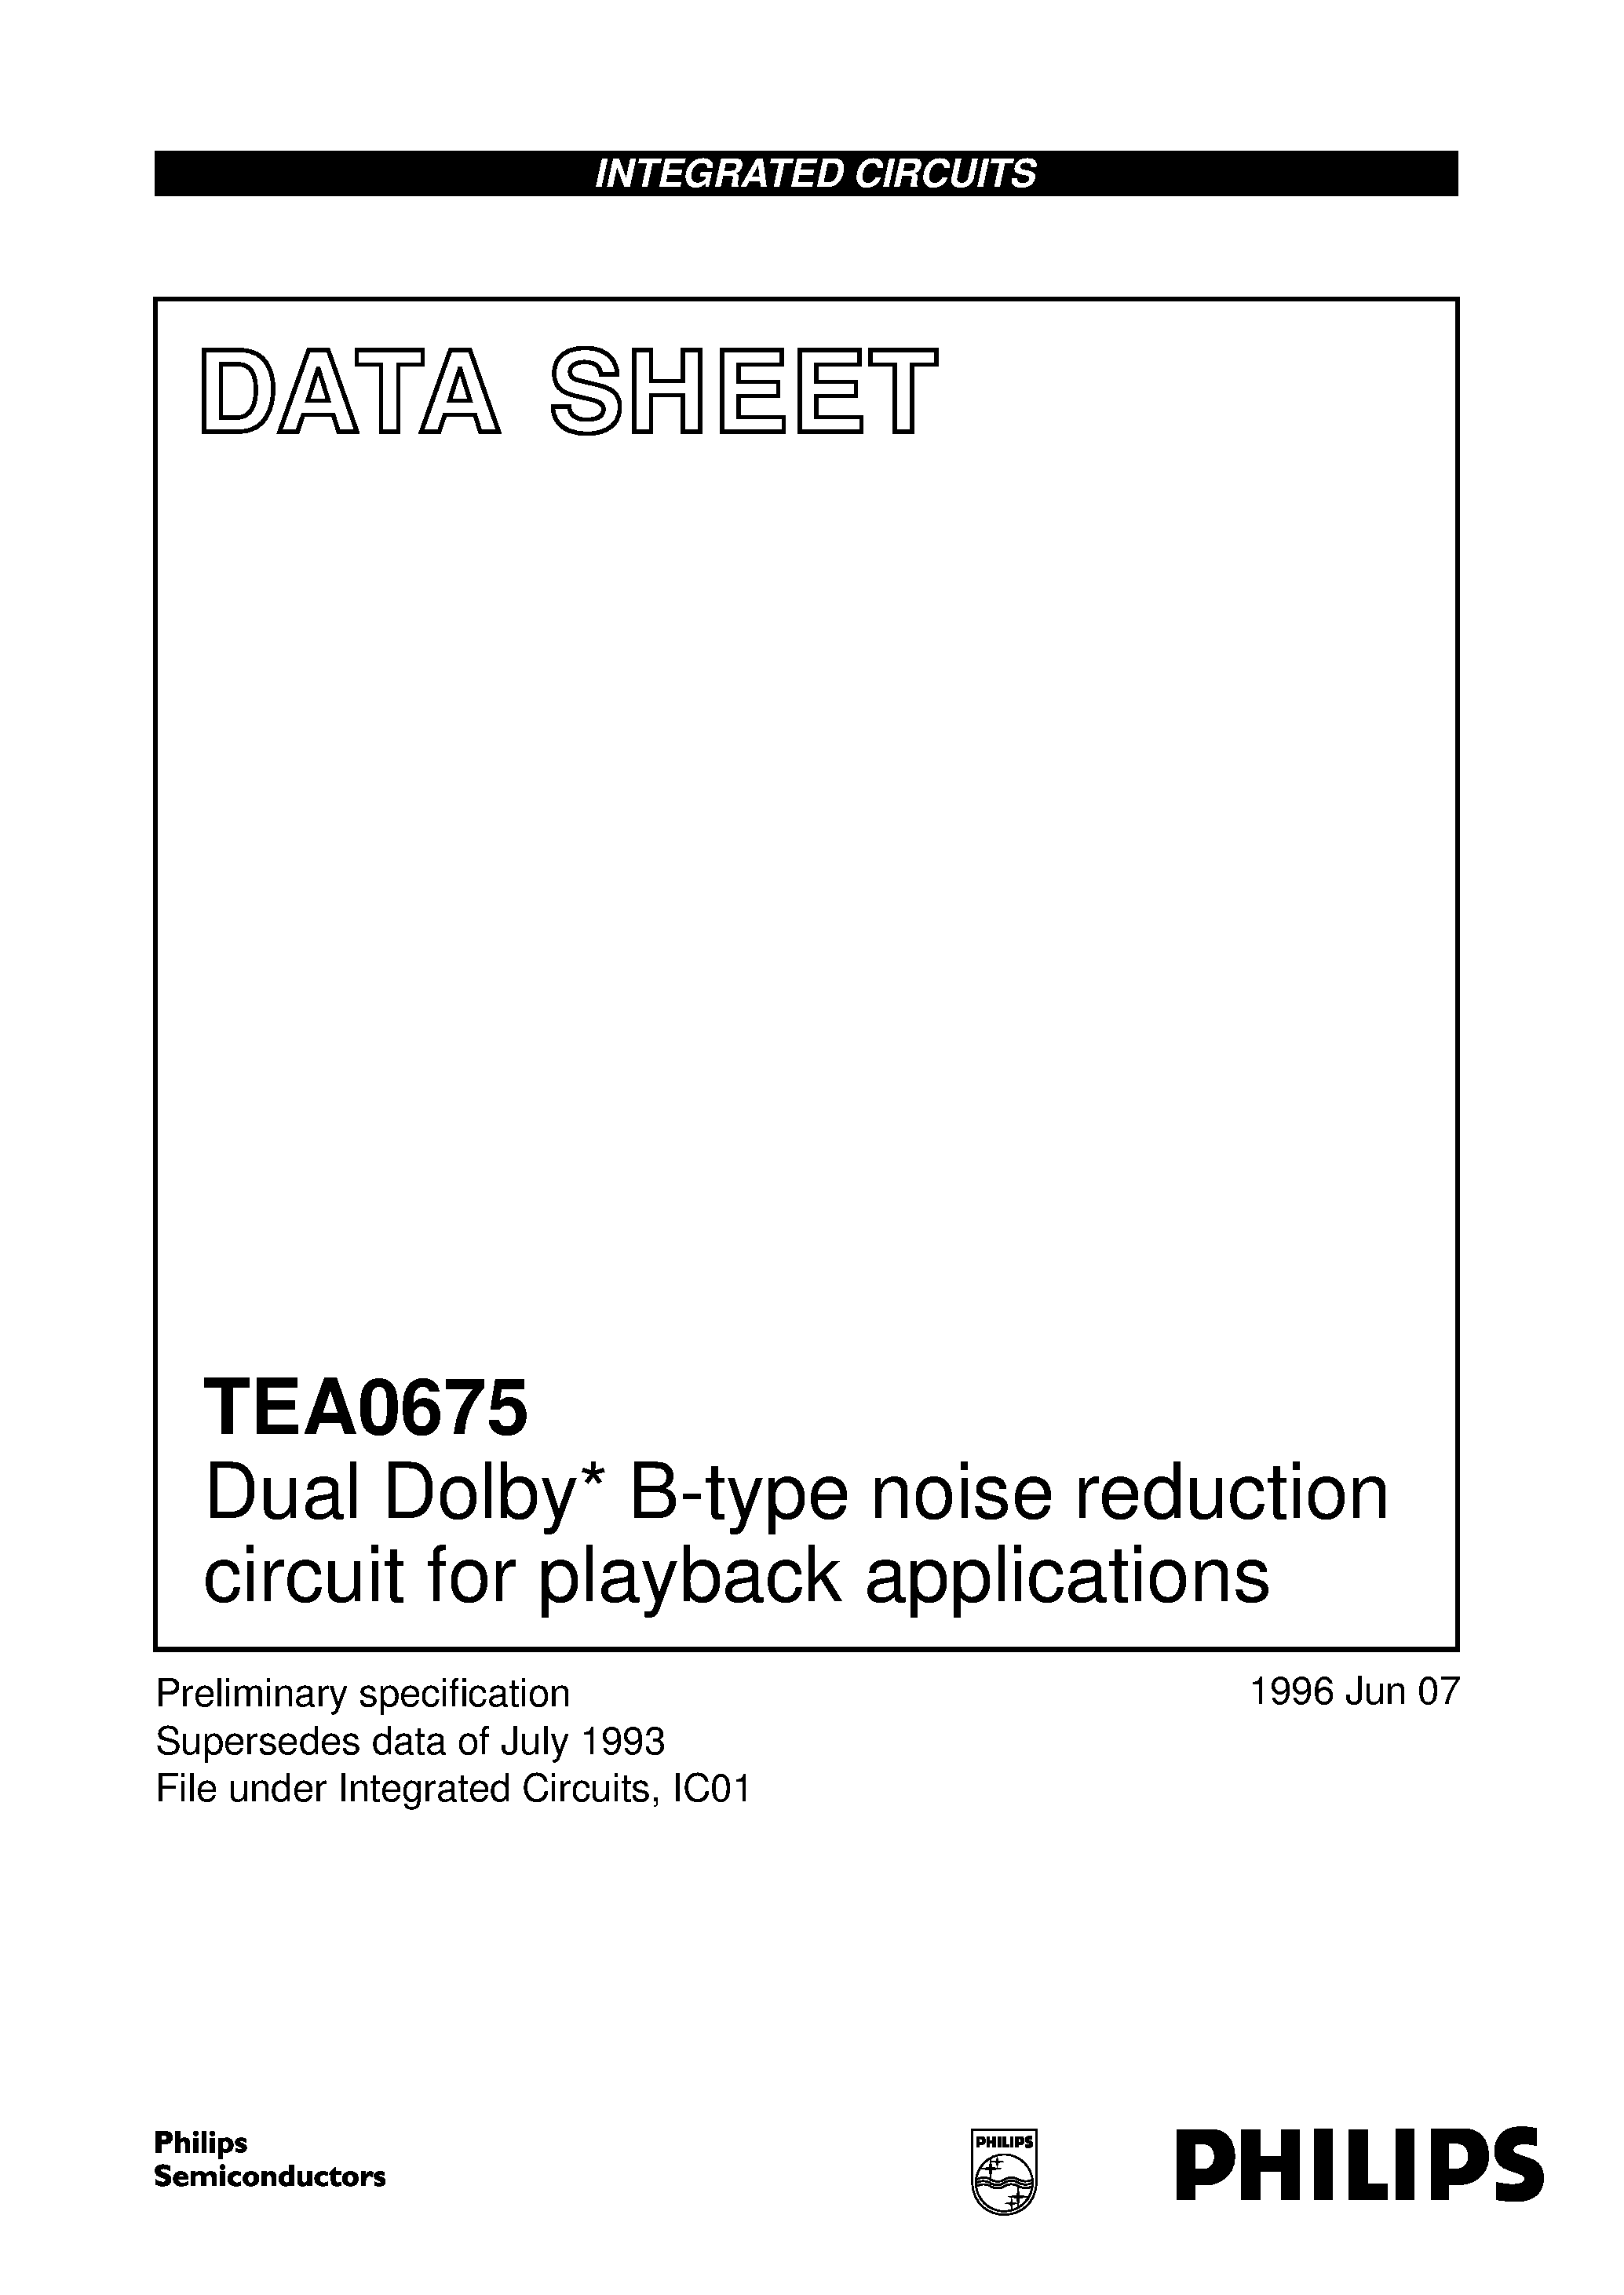 Даташит TEA0675 - Dual Dolby* B-type noise reduction circuit for playback applications страница 1